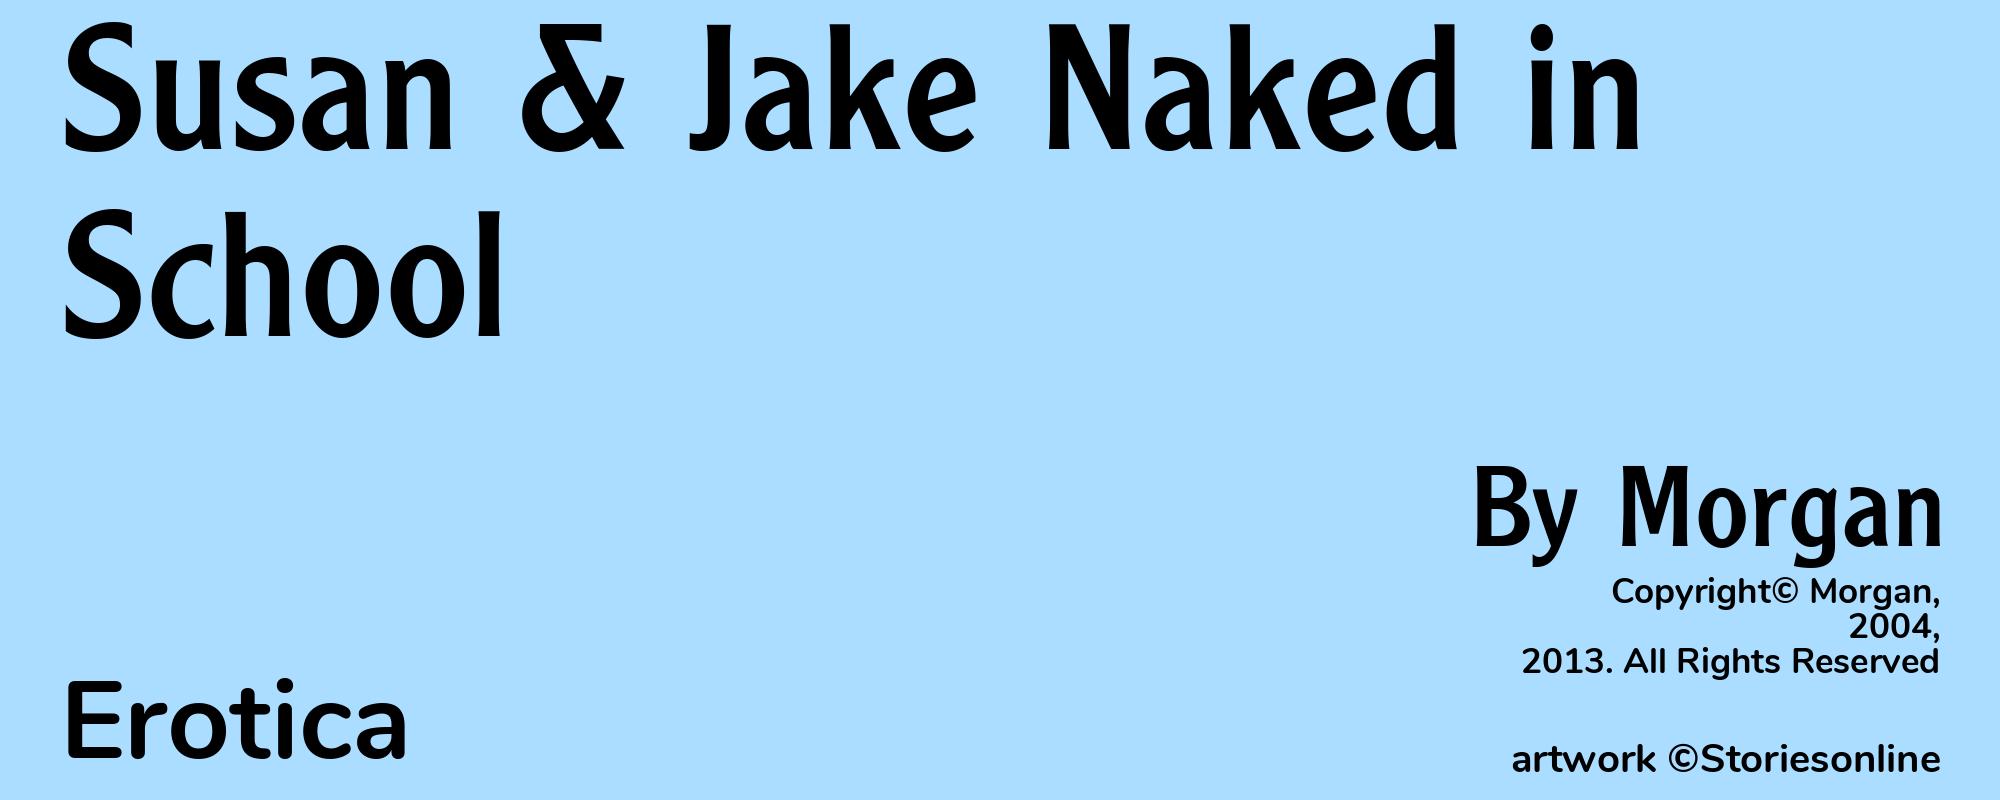 Susan & Jake Naked in School - Cover